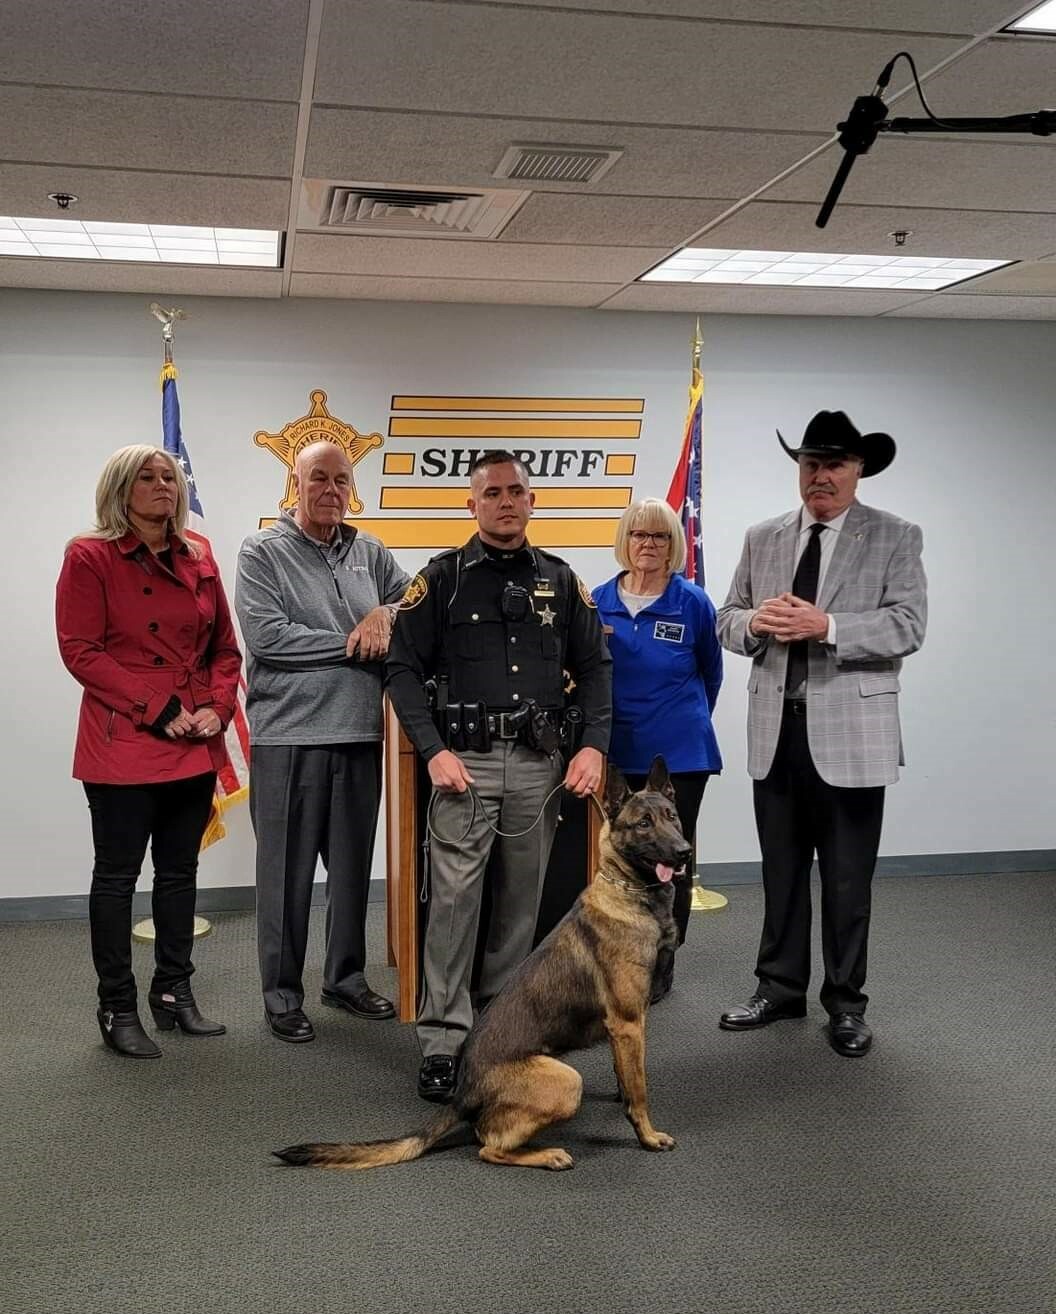 A Sheriff with a group of people and Boris the K9